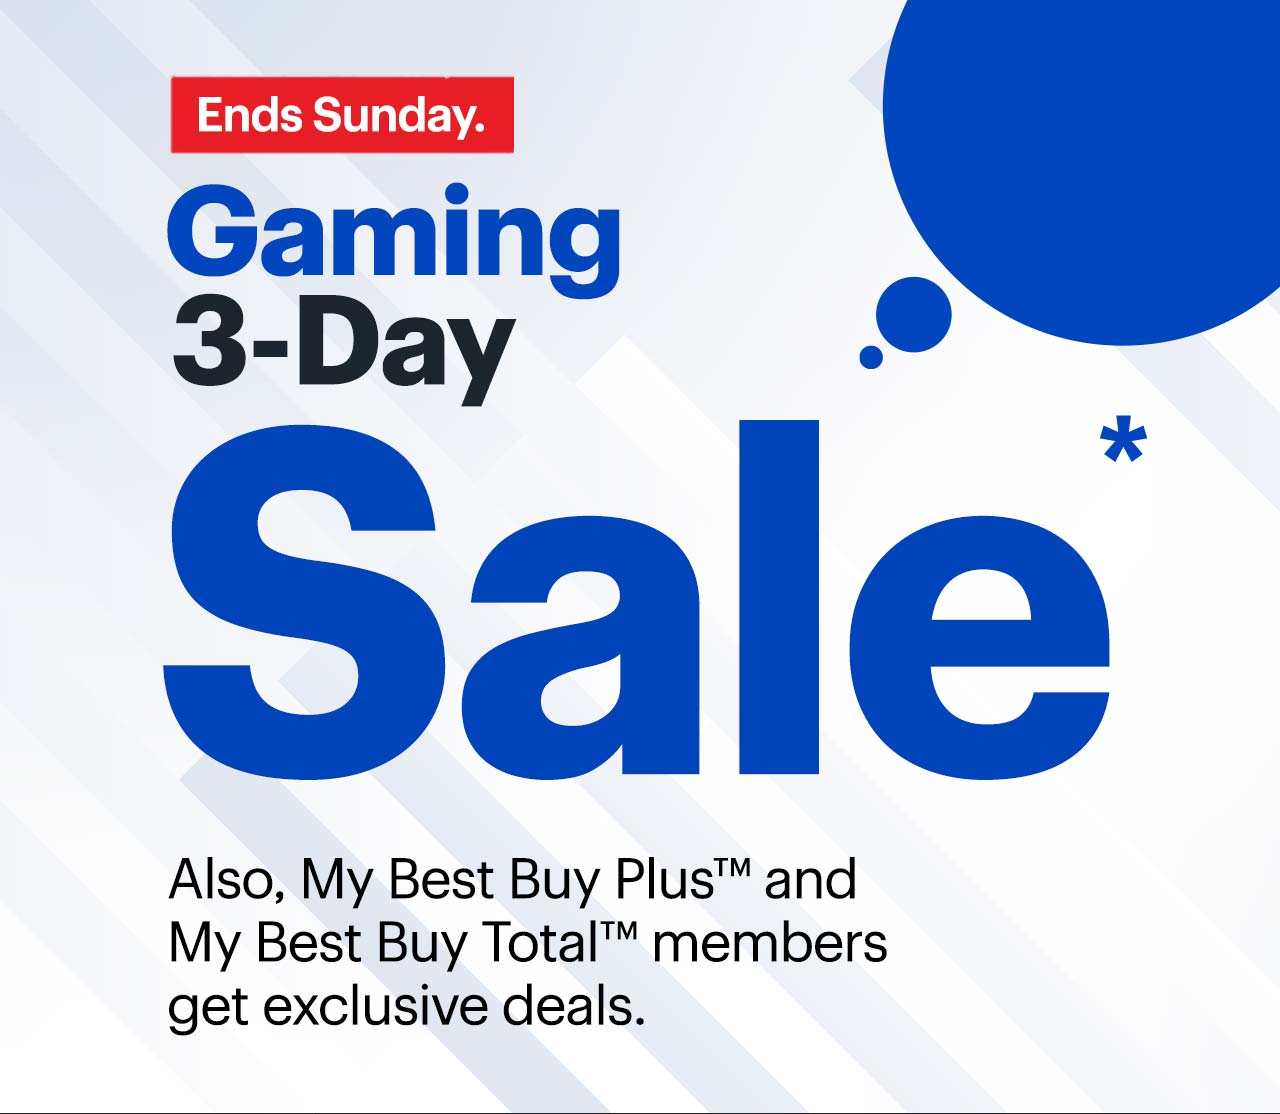 Gaming 3-Day Sale. Also, My Best Buy Plus™ and My Best Buy Total™ members get exclusive deals. Ends Sunday. Reference disclaimer.